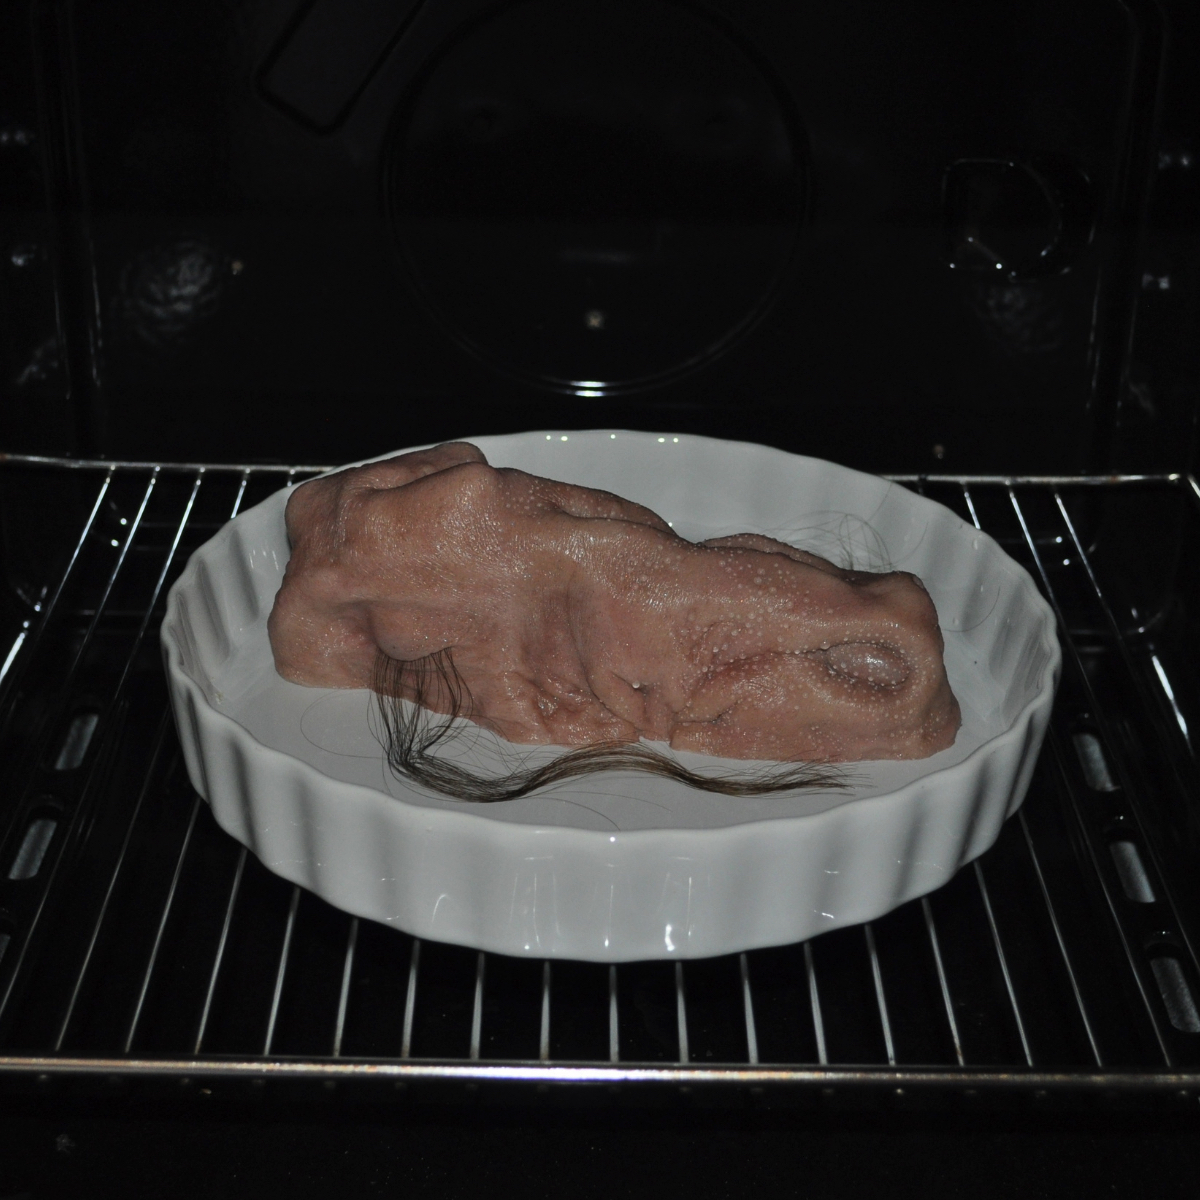 Matteo Ingrao, sculpture, art - Photograph of a hairy lump of synthetic flesh sat in a white crimped pie dish in an oven.